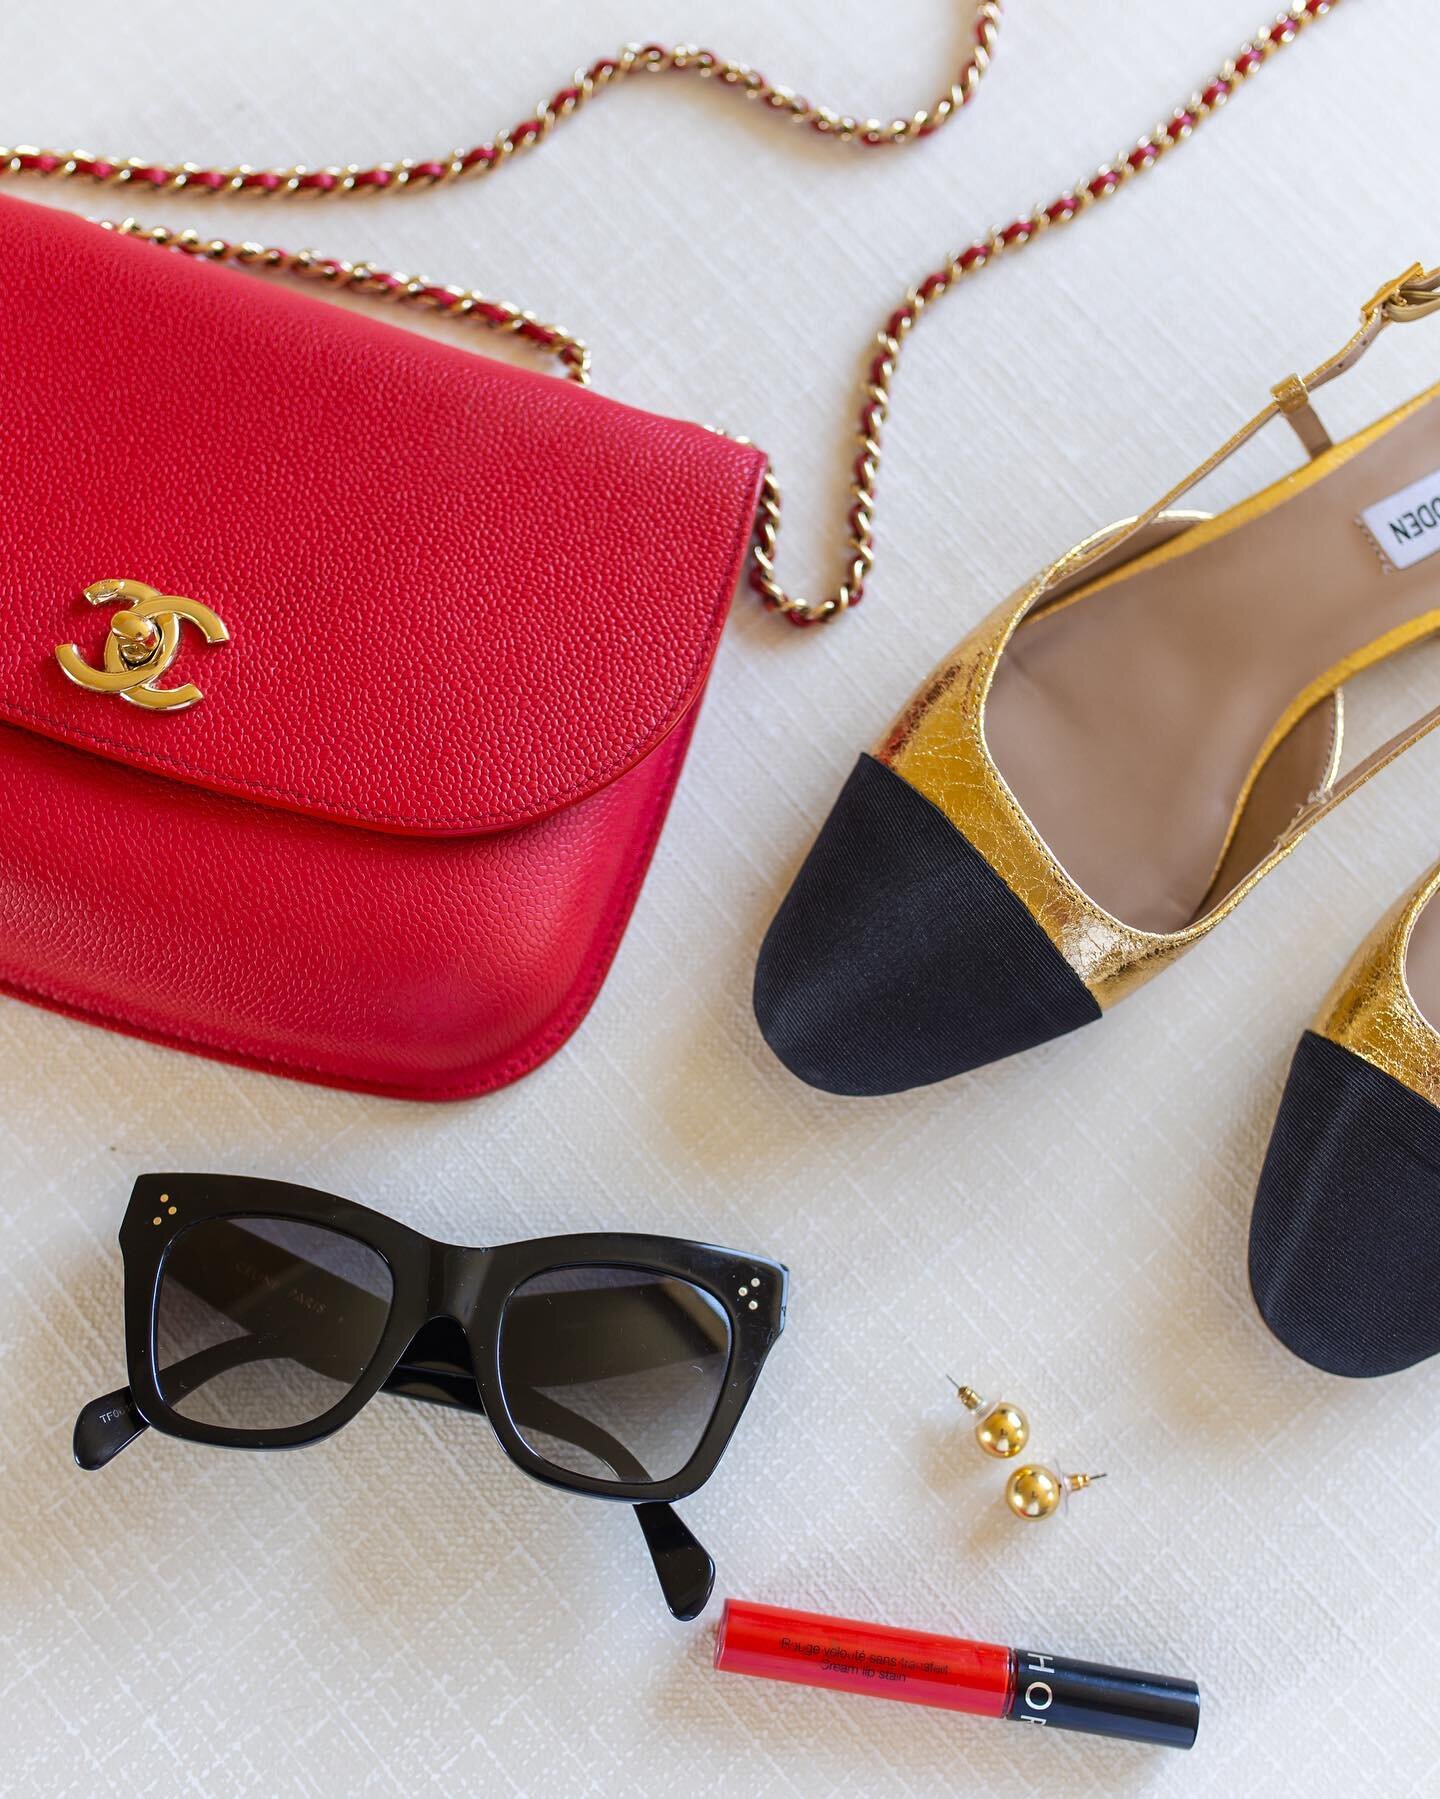 Just a few of our favorite things for fall! ❤️ Always love a pop of red and touch of gold&hellip; you just can&rsquo;t go wrong with the classics! ✔️ PS sharing all of the details, including our &ldquo;go-to&rdquo; red lip and under $100 gold flats a